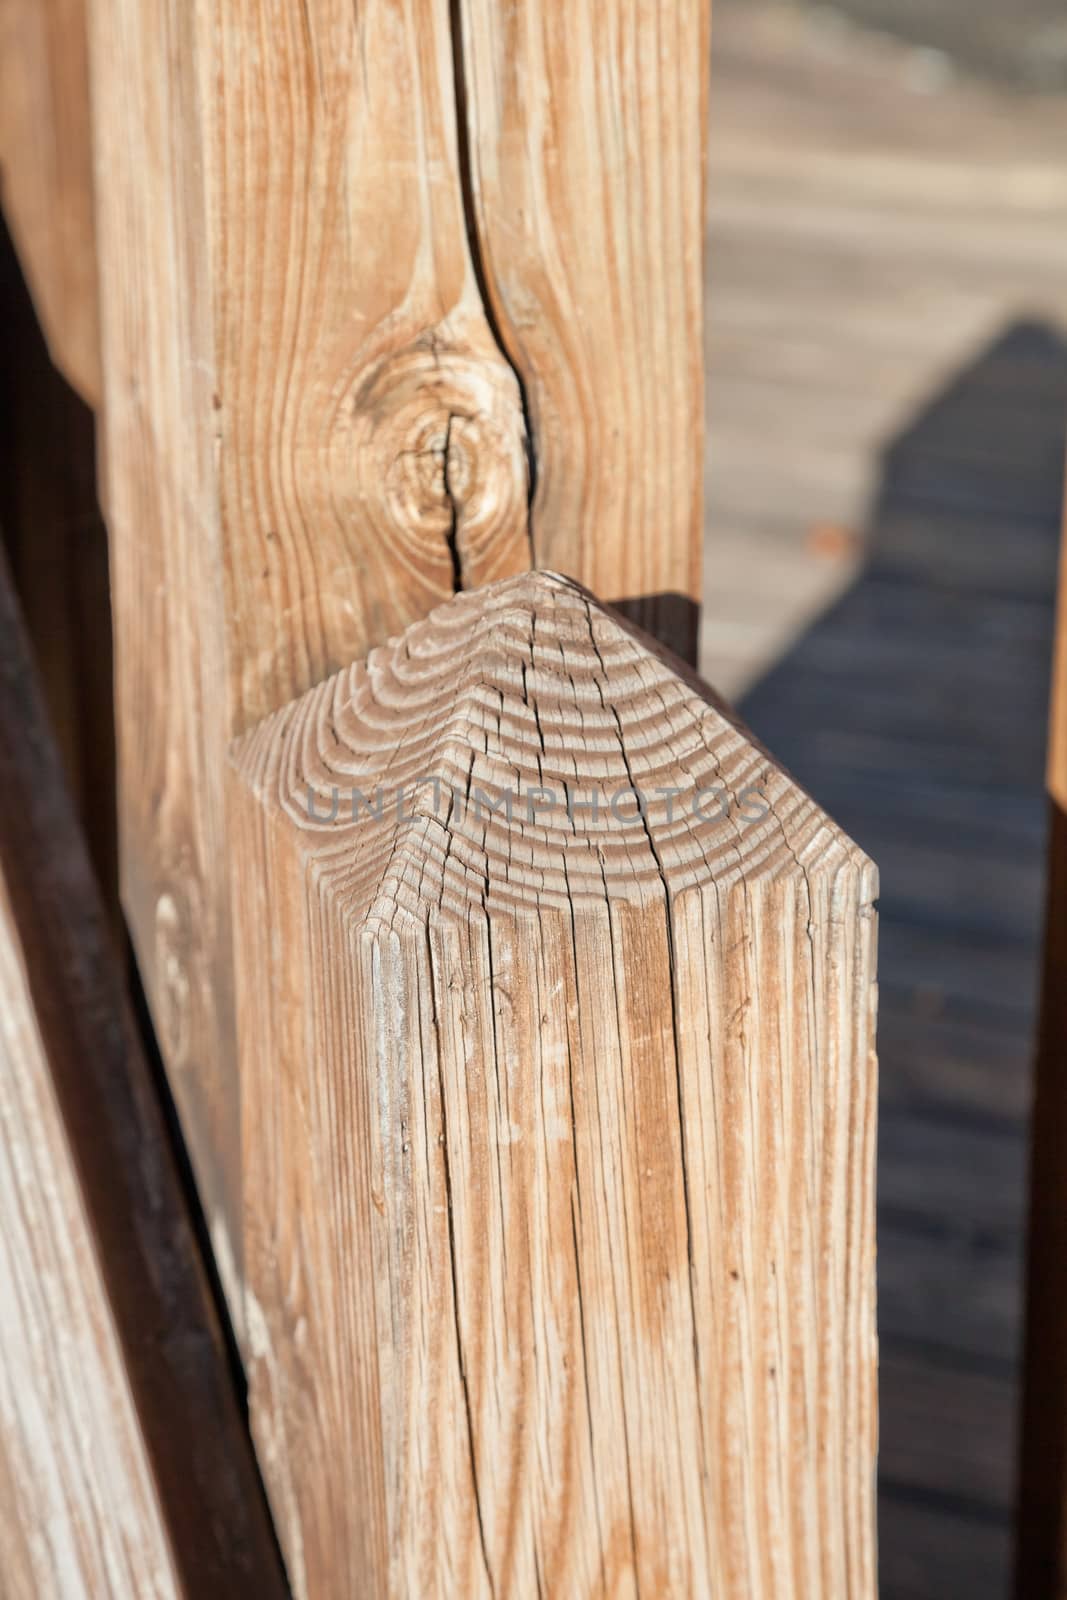 The Old Wooden Fence Detail of Prism